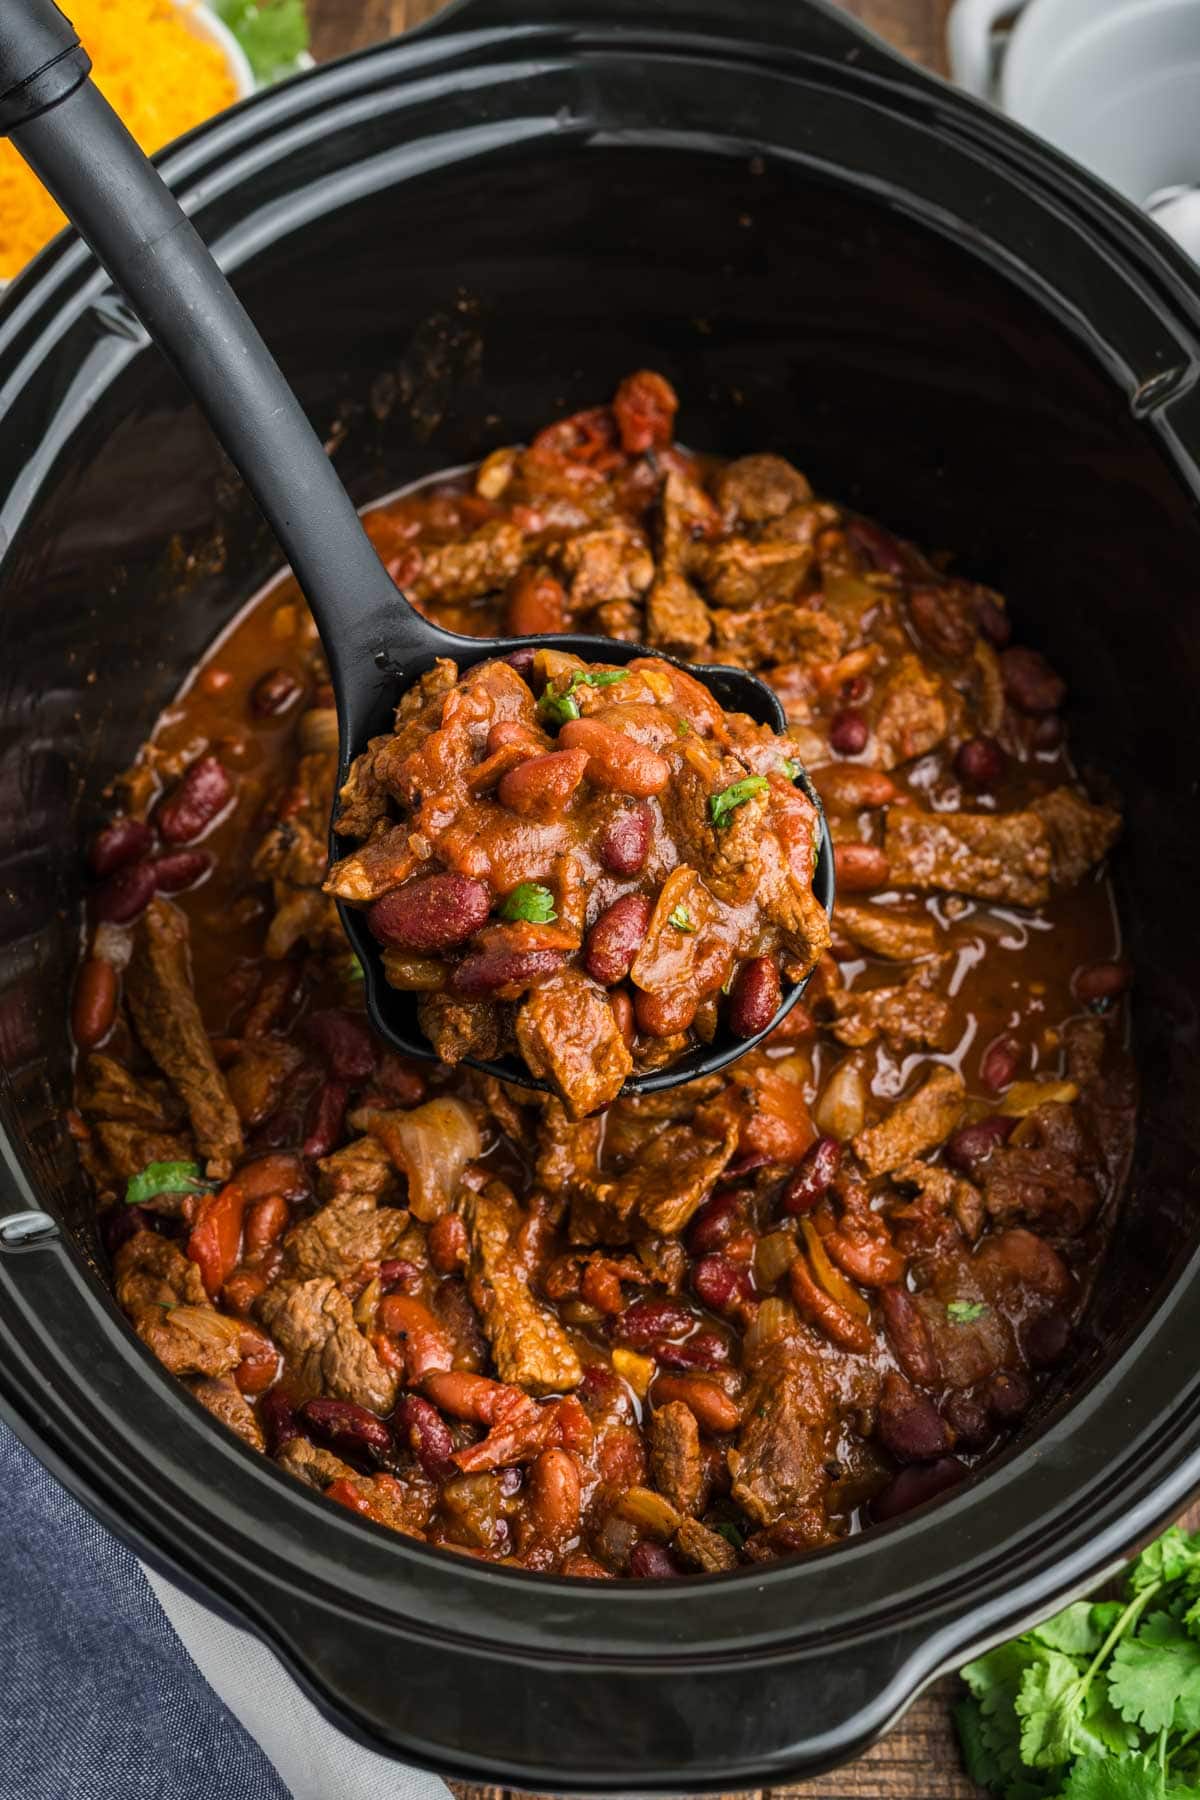 Steak chili in a slow cooker with a ladle.